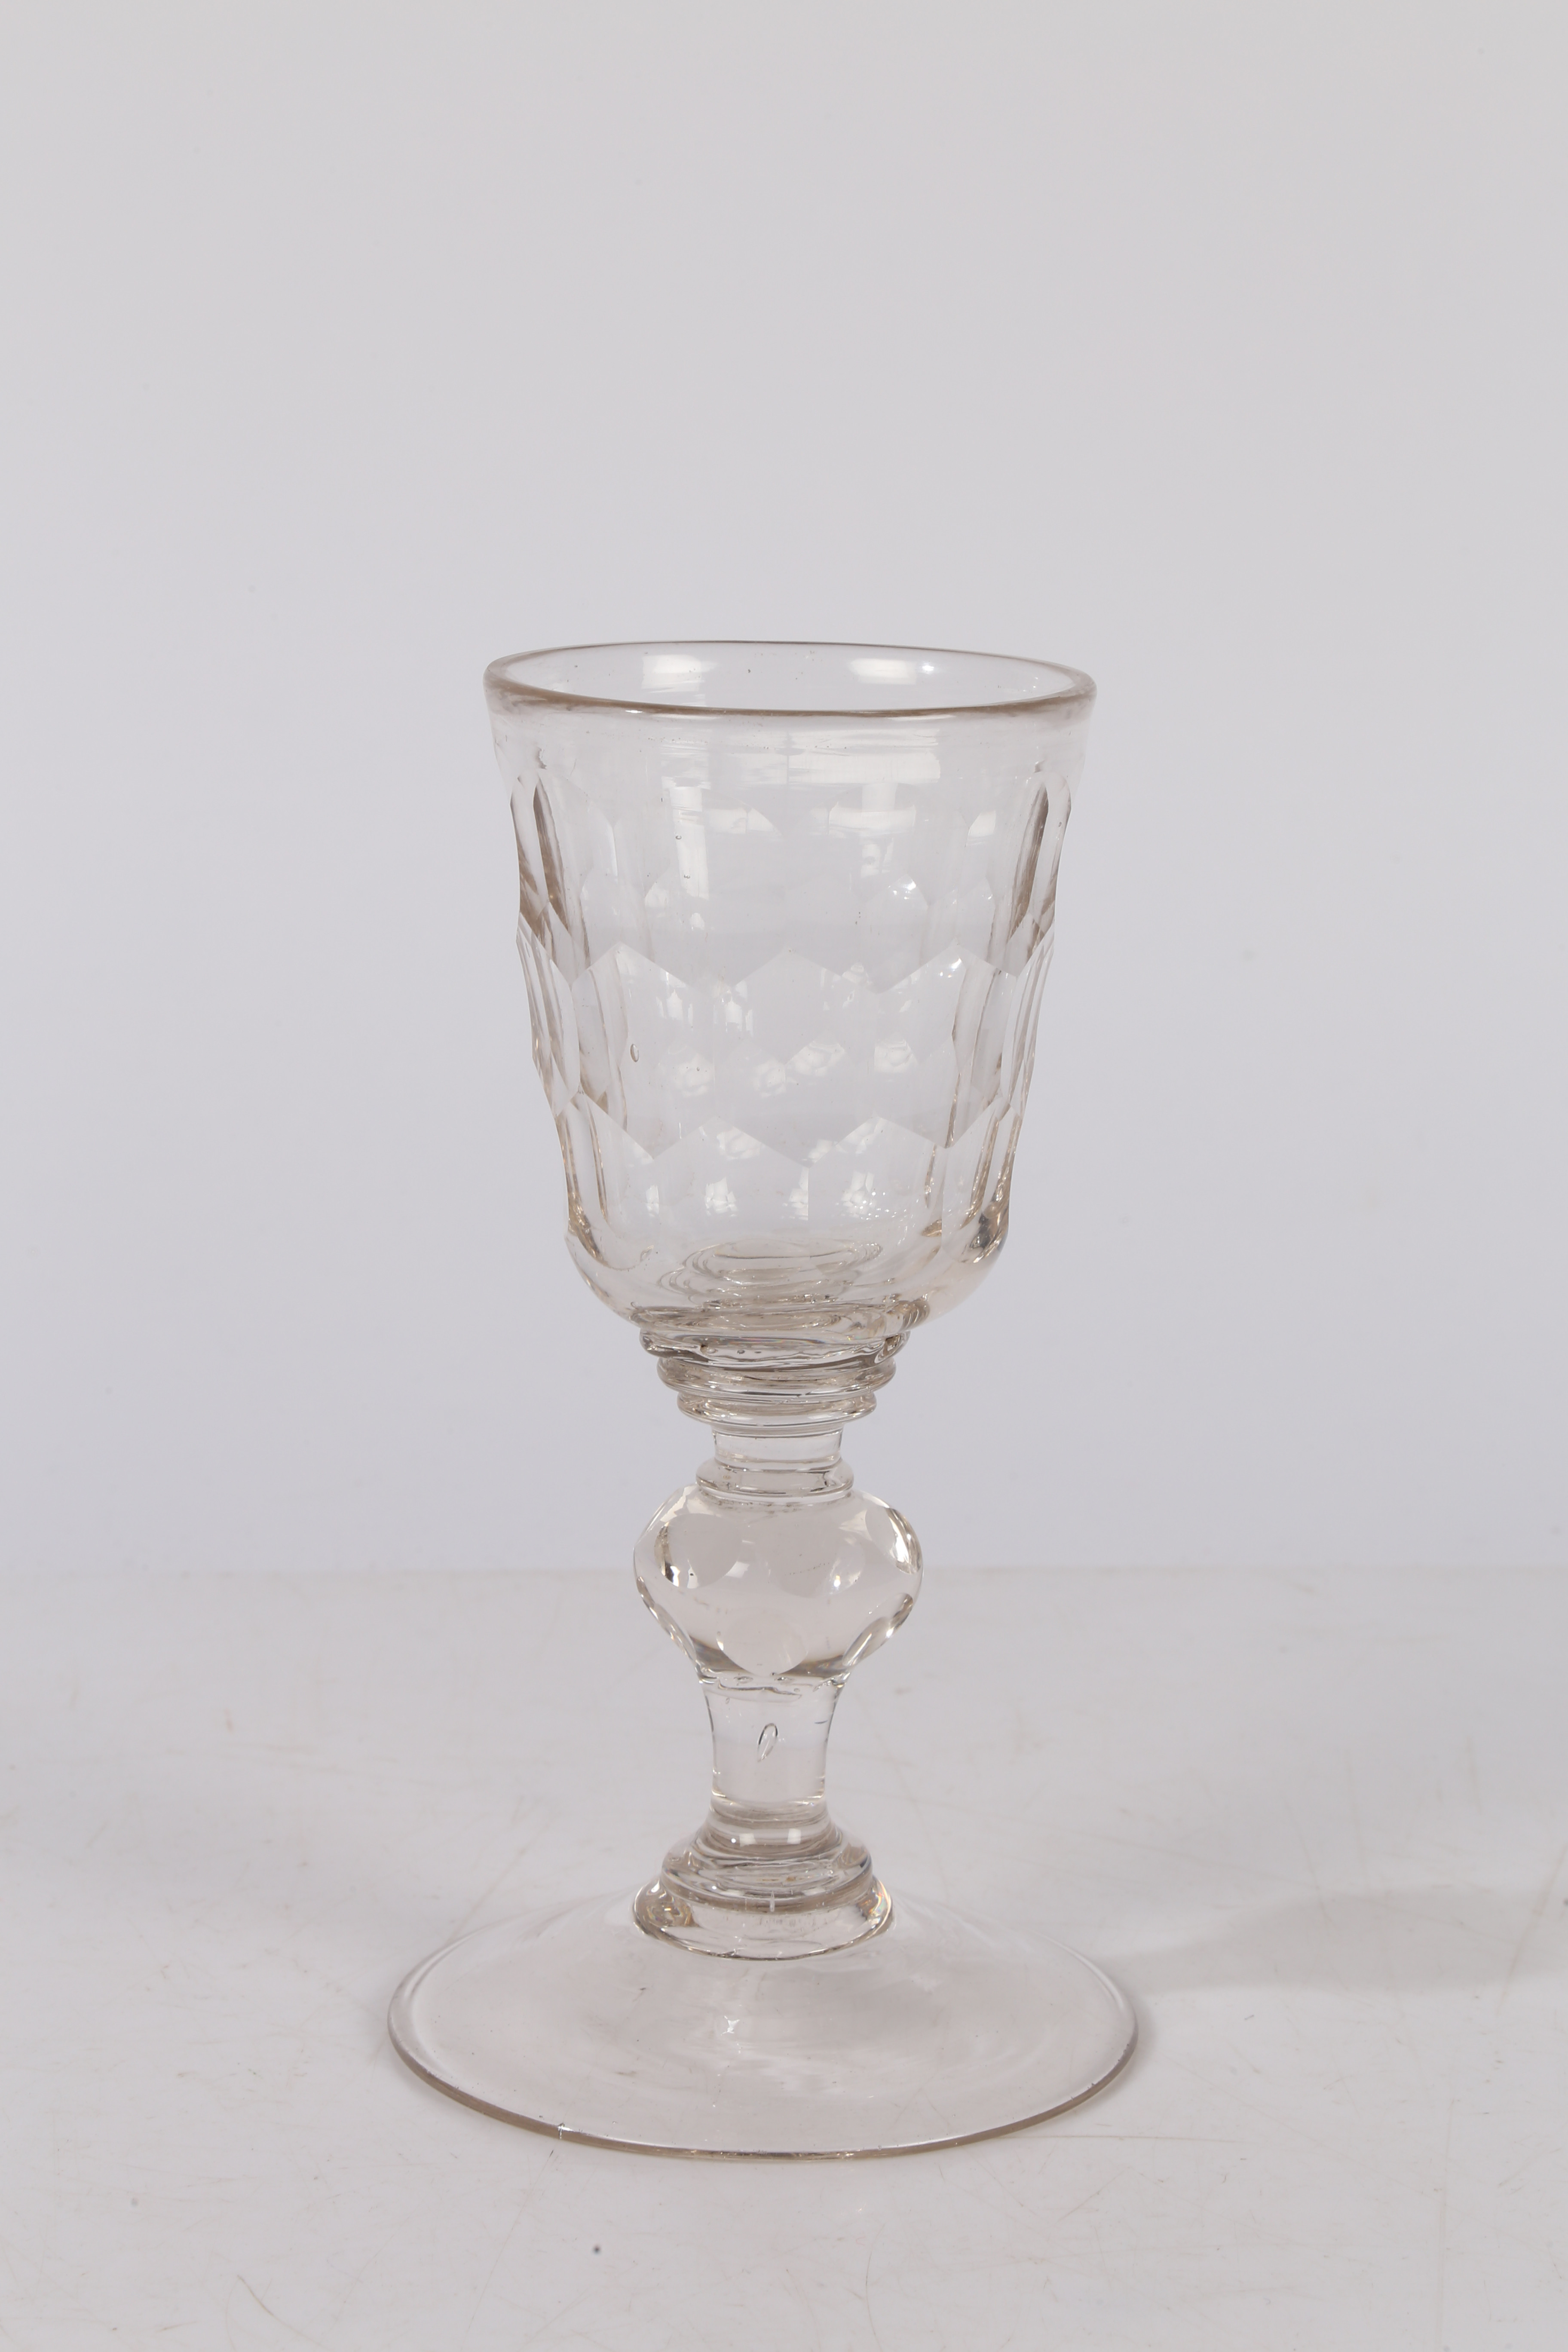 AN EARLY TO MID 18TH CENTURY BOHEMIAN GOBLET. - Image 4 of 4